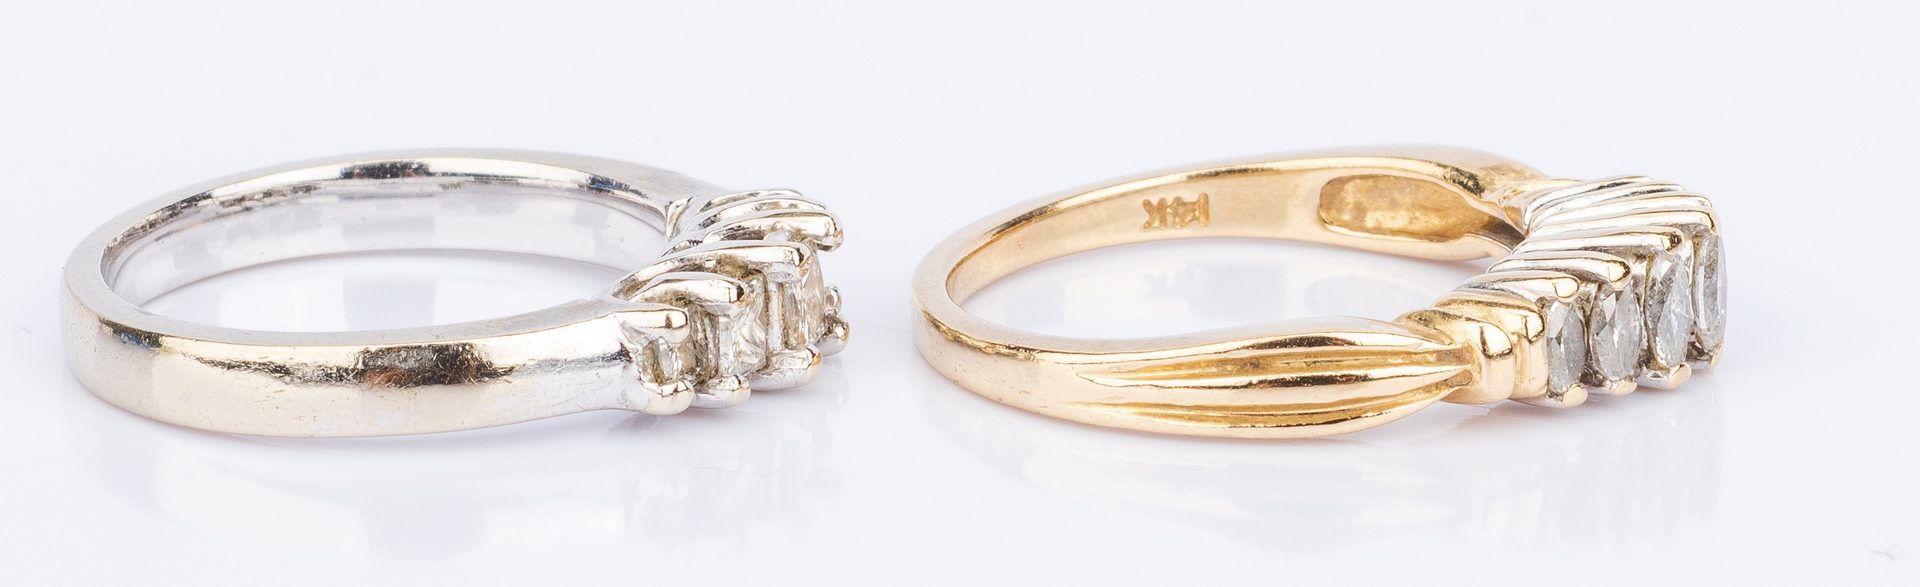 Lot 852: 2 Diamond Bands, Princess and Marquise Cut